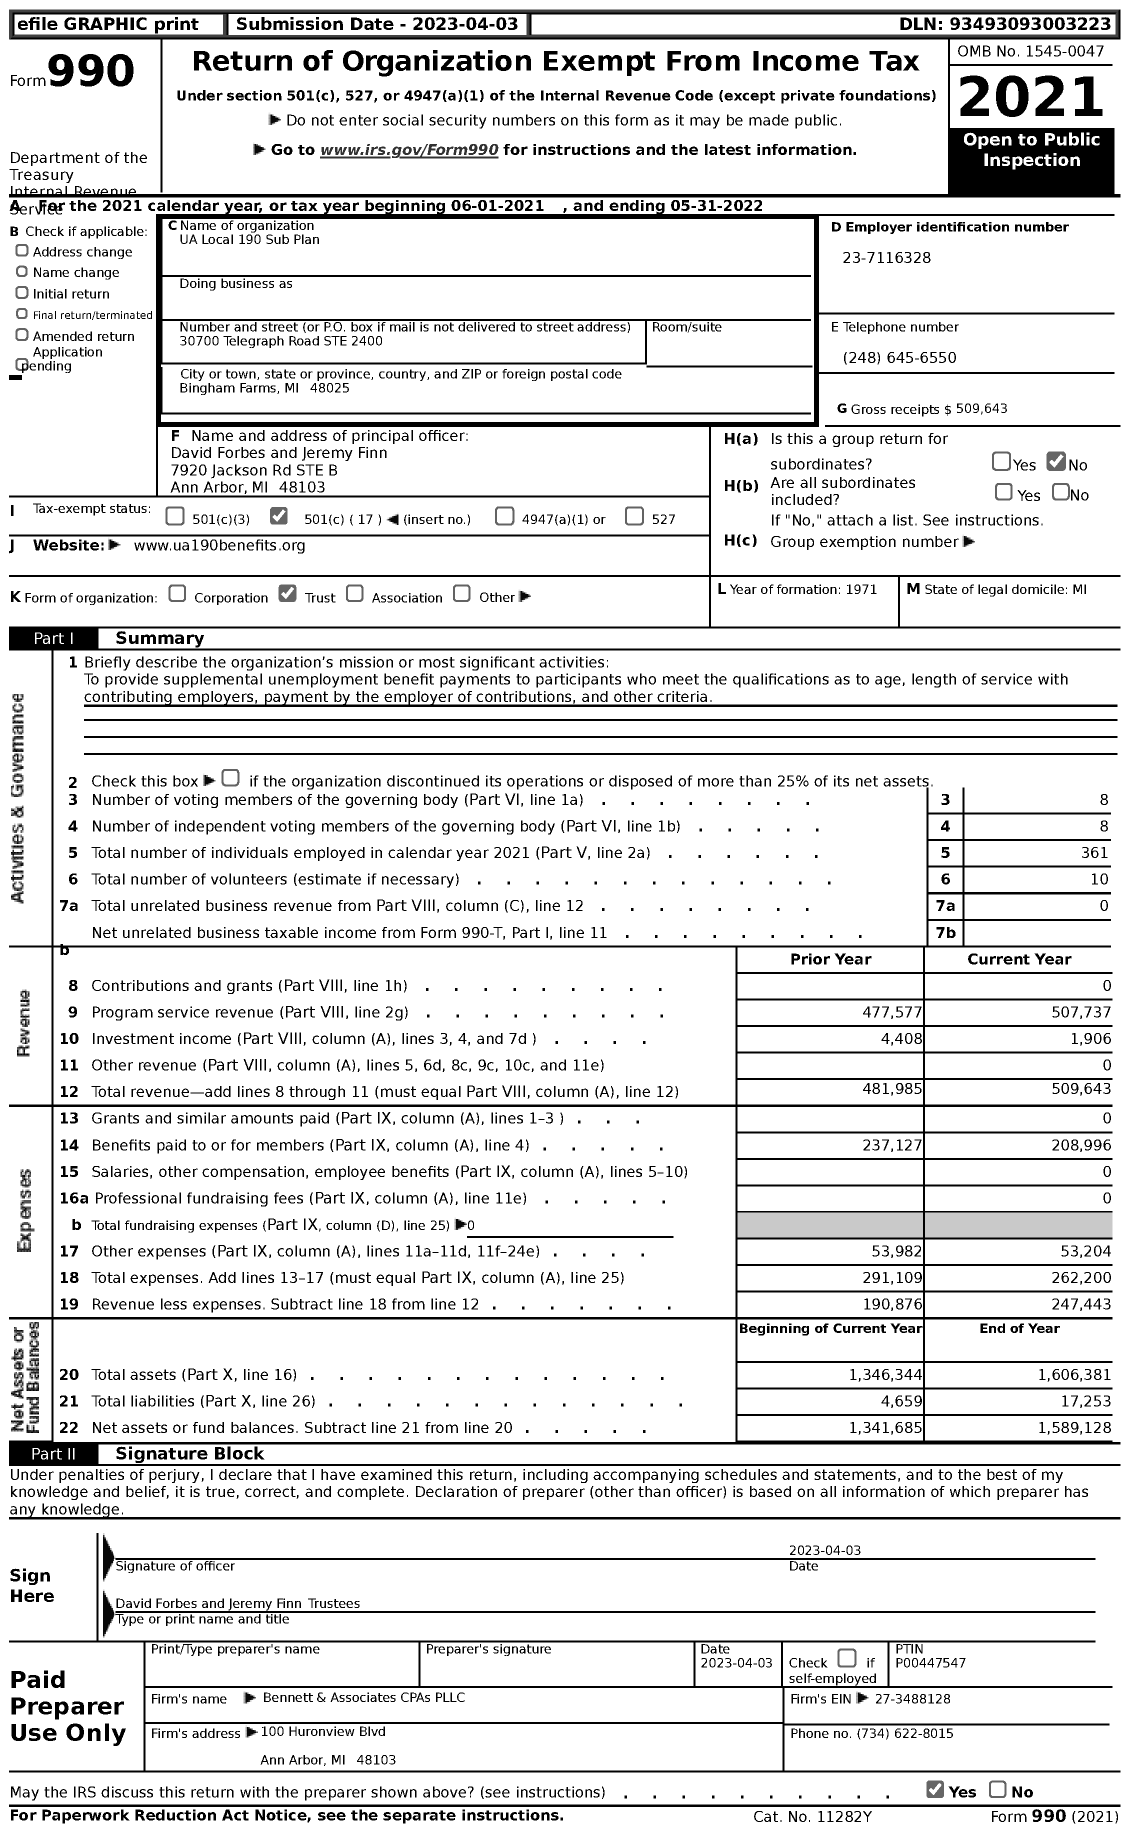 Image of first page of 2021 Form 990 for UA Local 190 Sub Plan